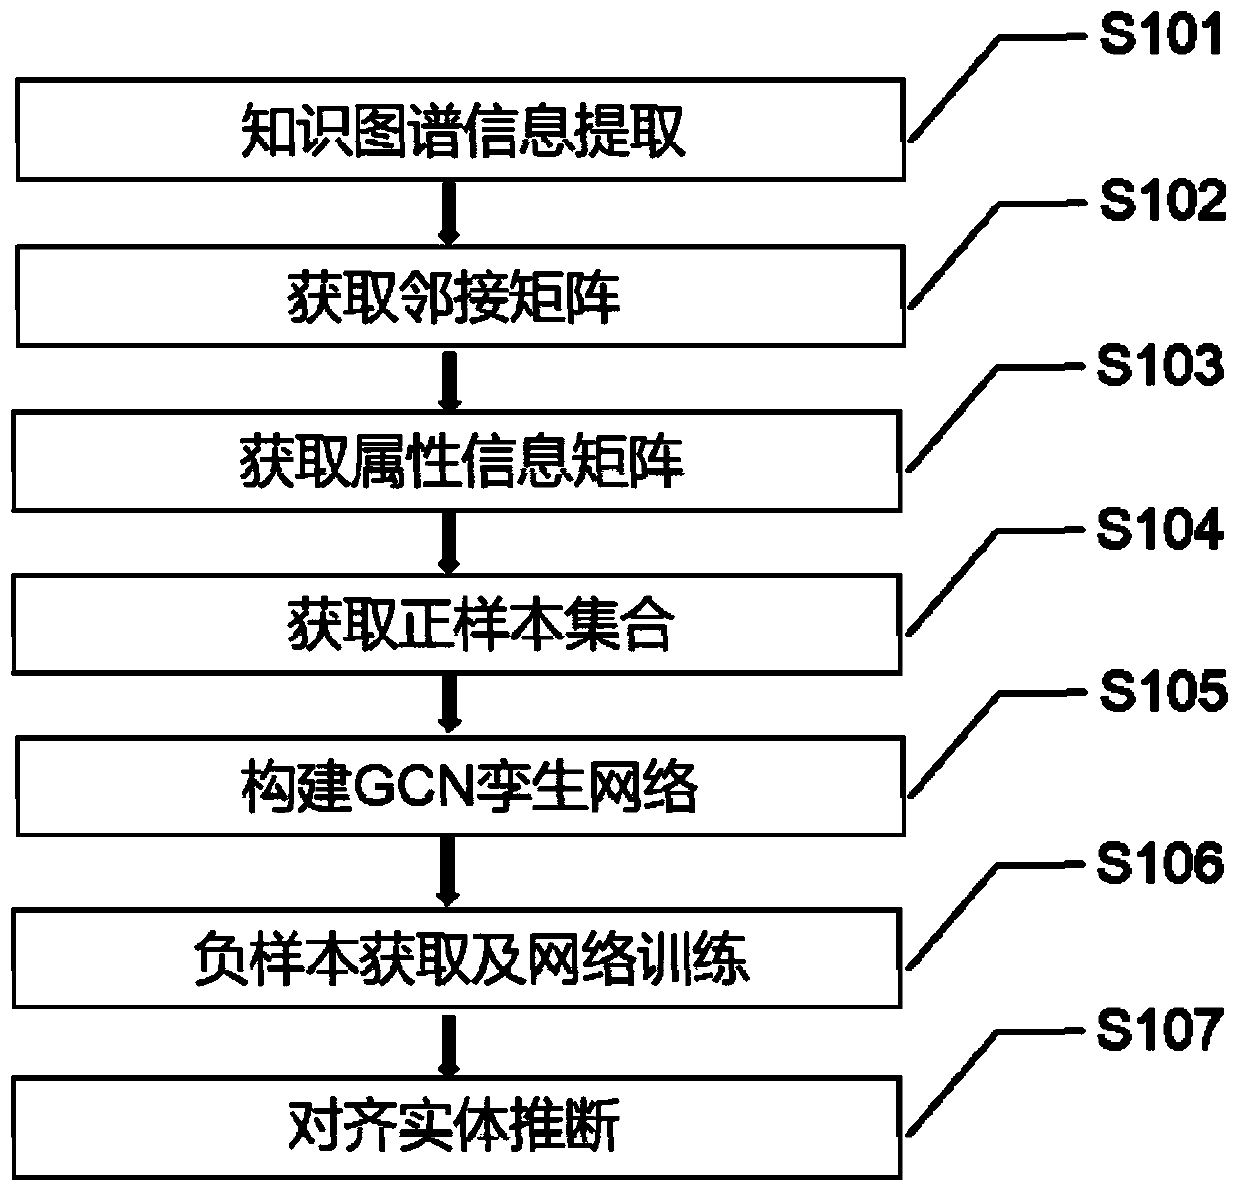 Cross-language knowledge graph entity alignment method based on GCN twinning network